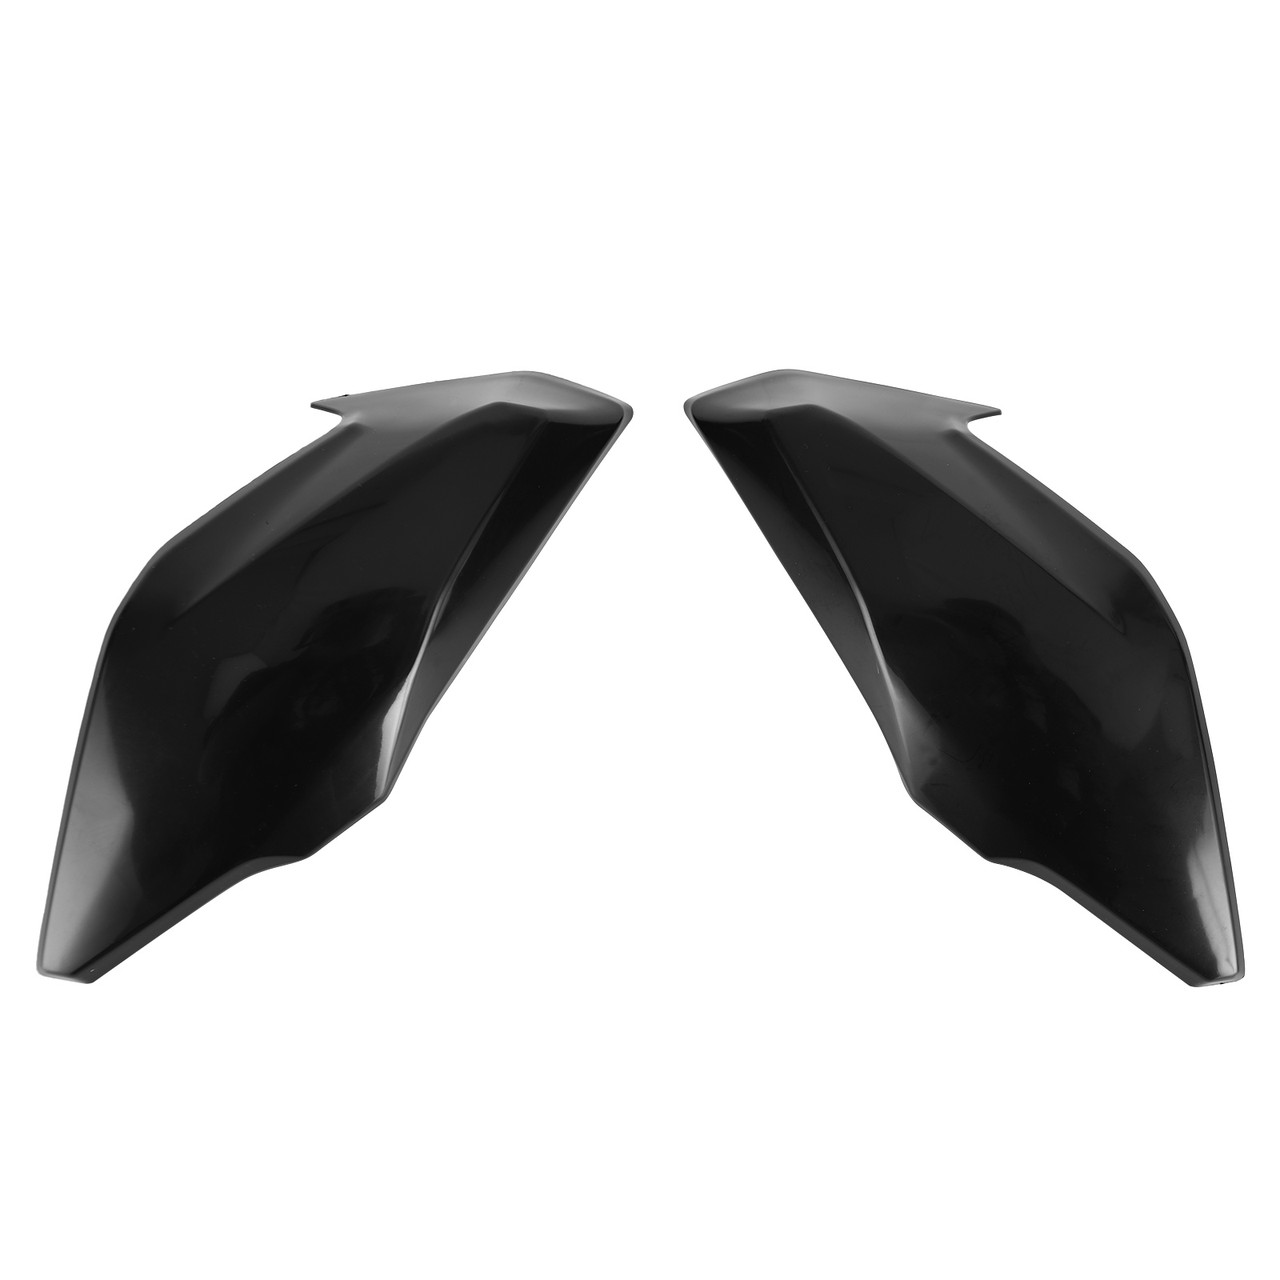 Unpainted ABS Front Side Tank Cover Fairing Pannel Cowl Fit for Kawasaki Z650 2017-2019 Aftermarket Fairing Part